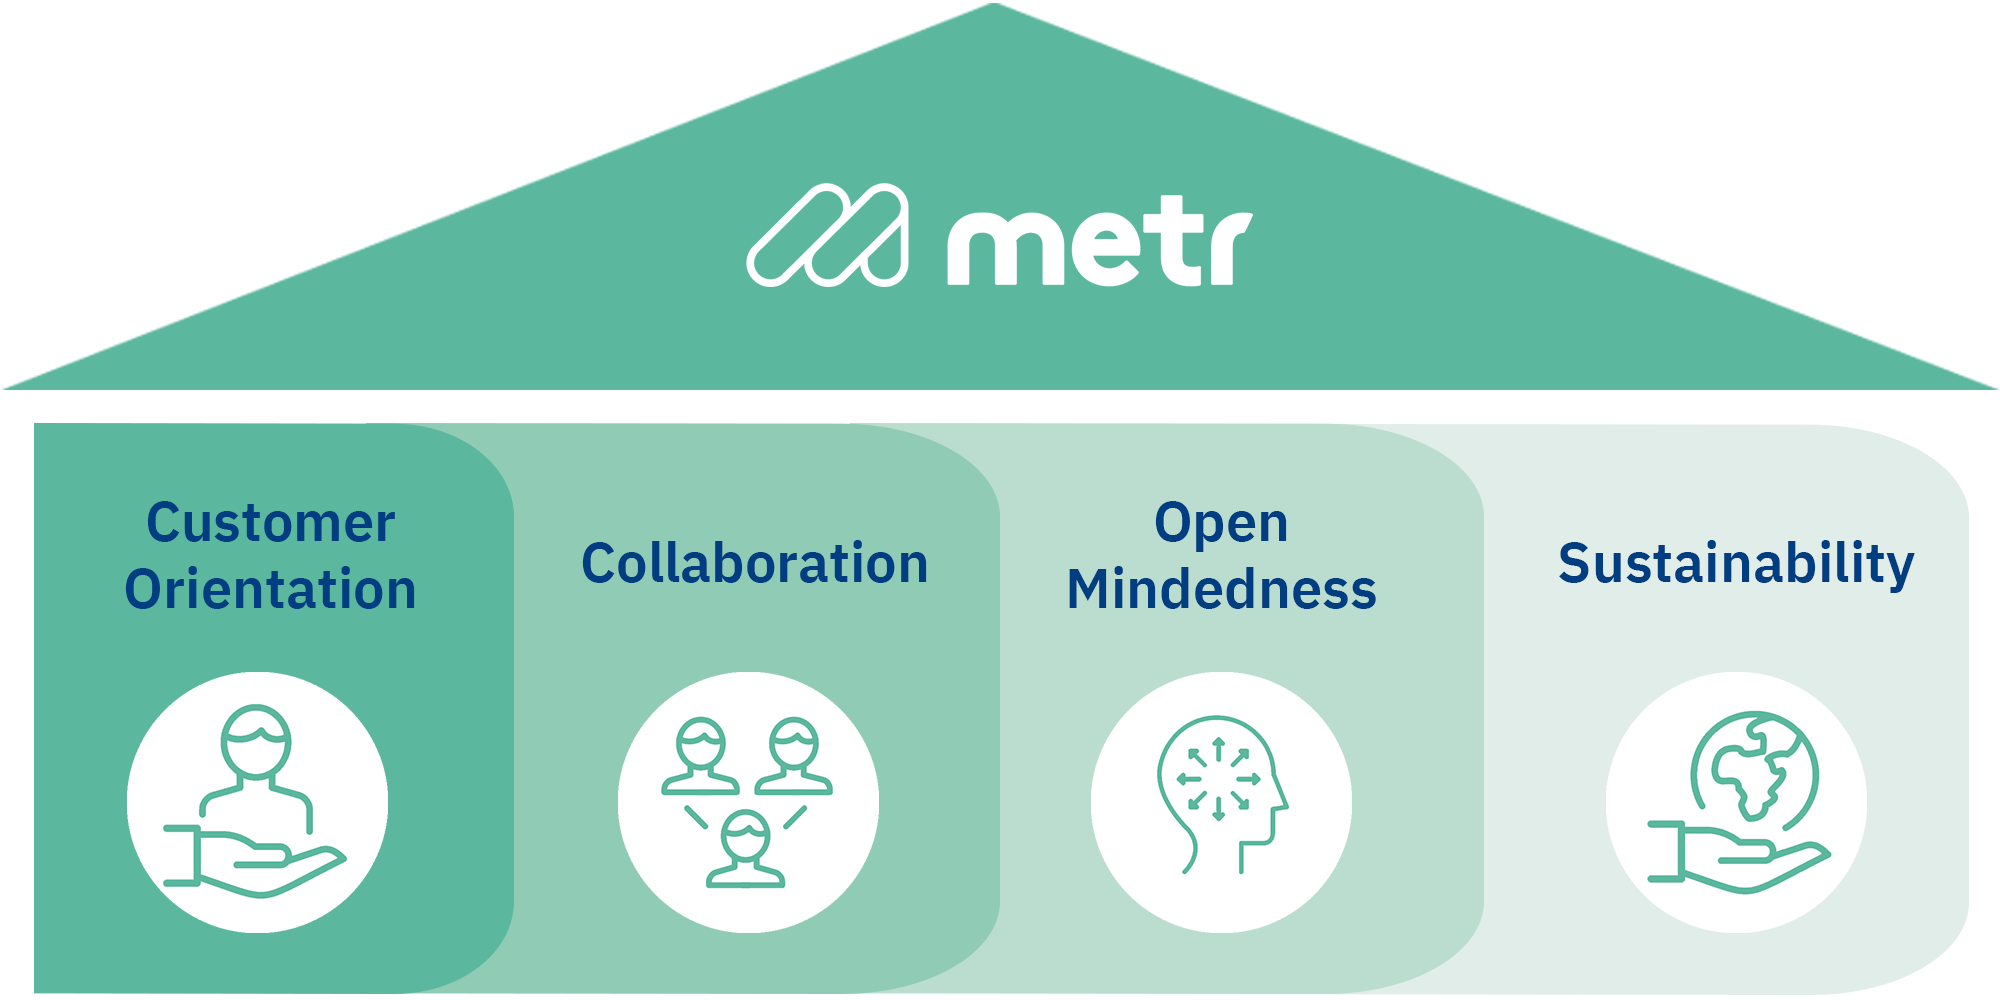 The metr values are composed of customer orientation, collaboration, open mindedness and sustainability.